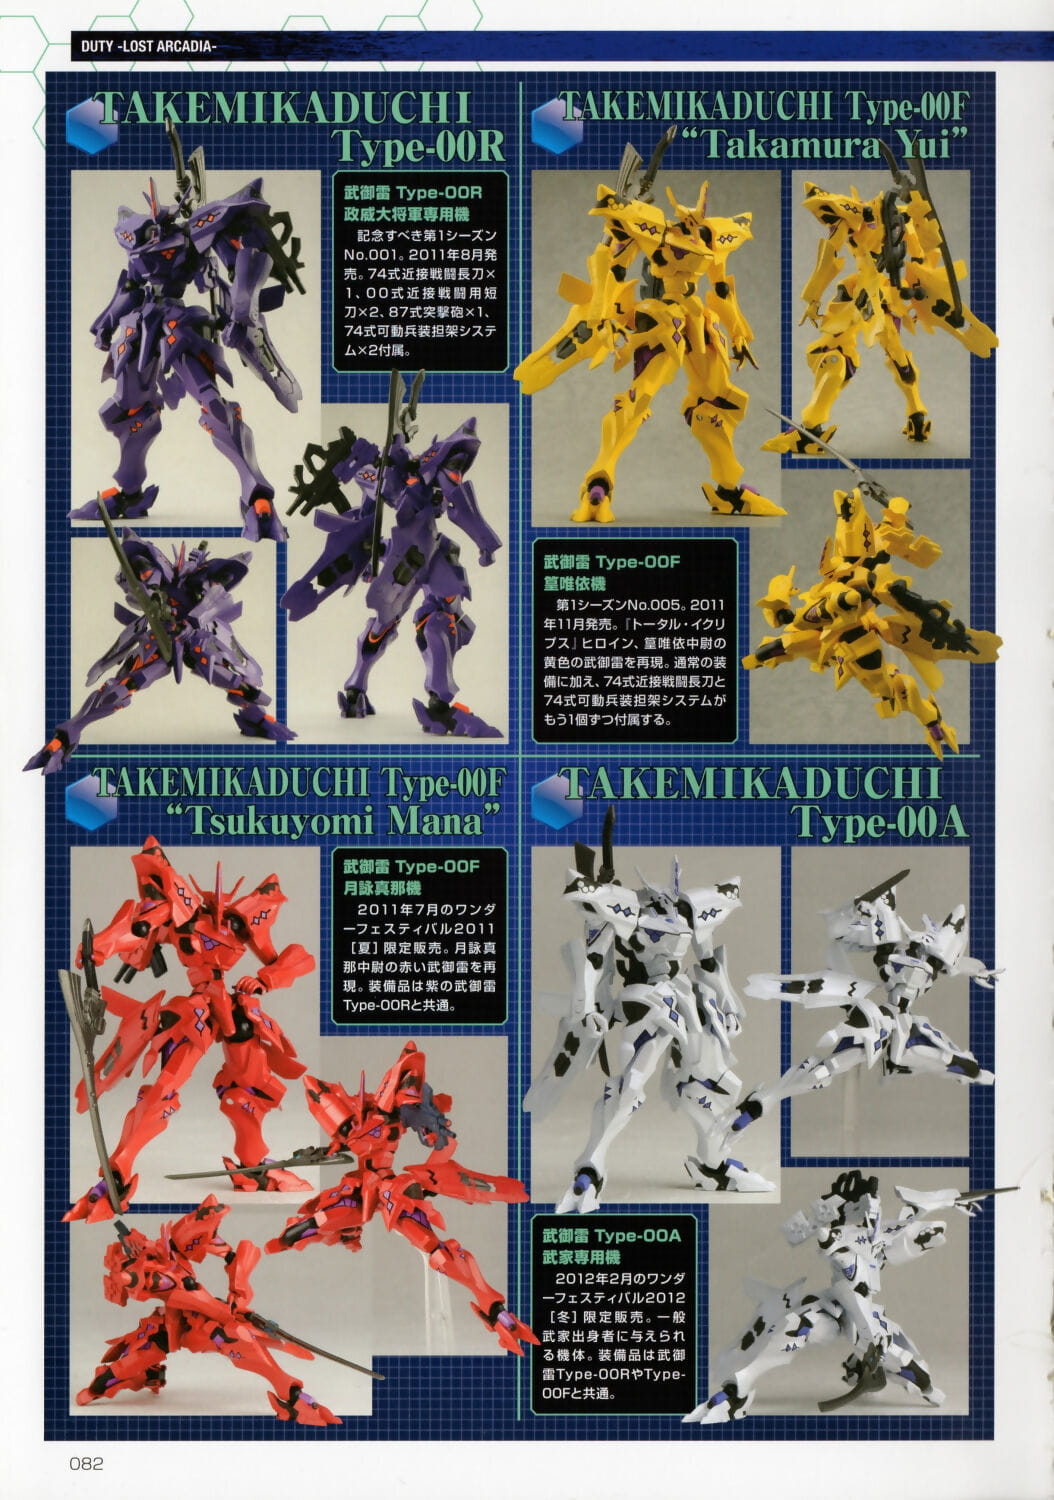 Hobby Japan MUV-LUV ALTERNATIVE IN EURO FRONT; DUTY -LOST ARCADIA- - part 5